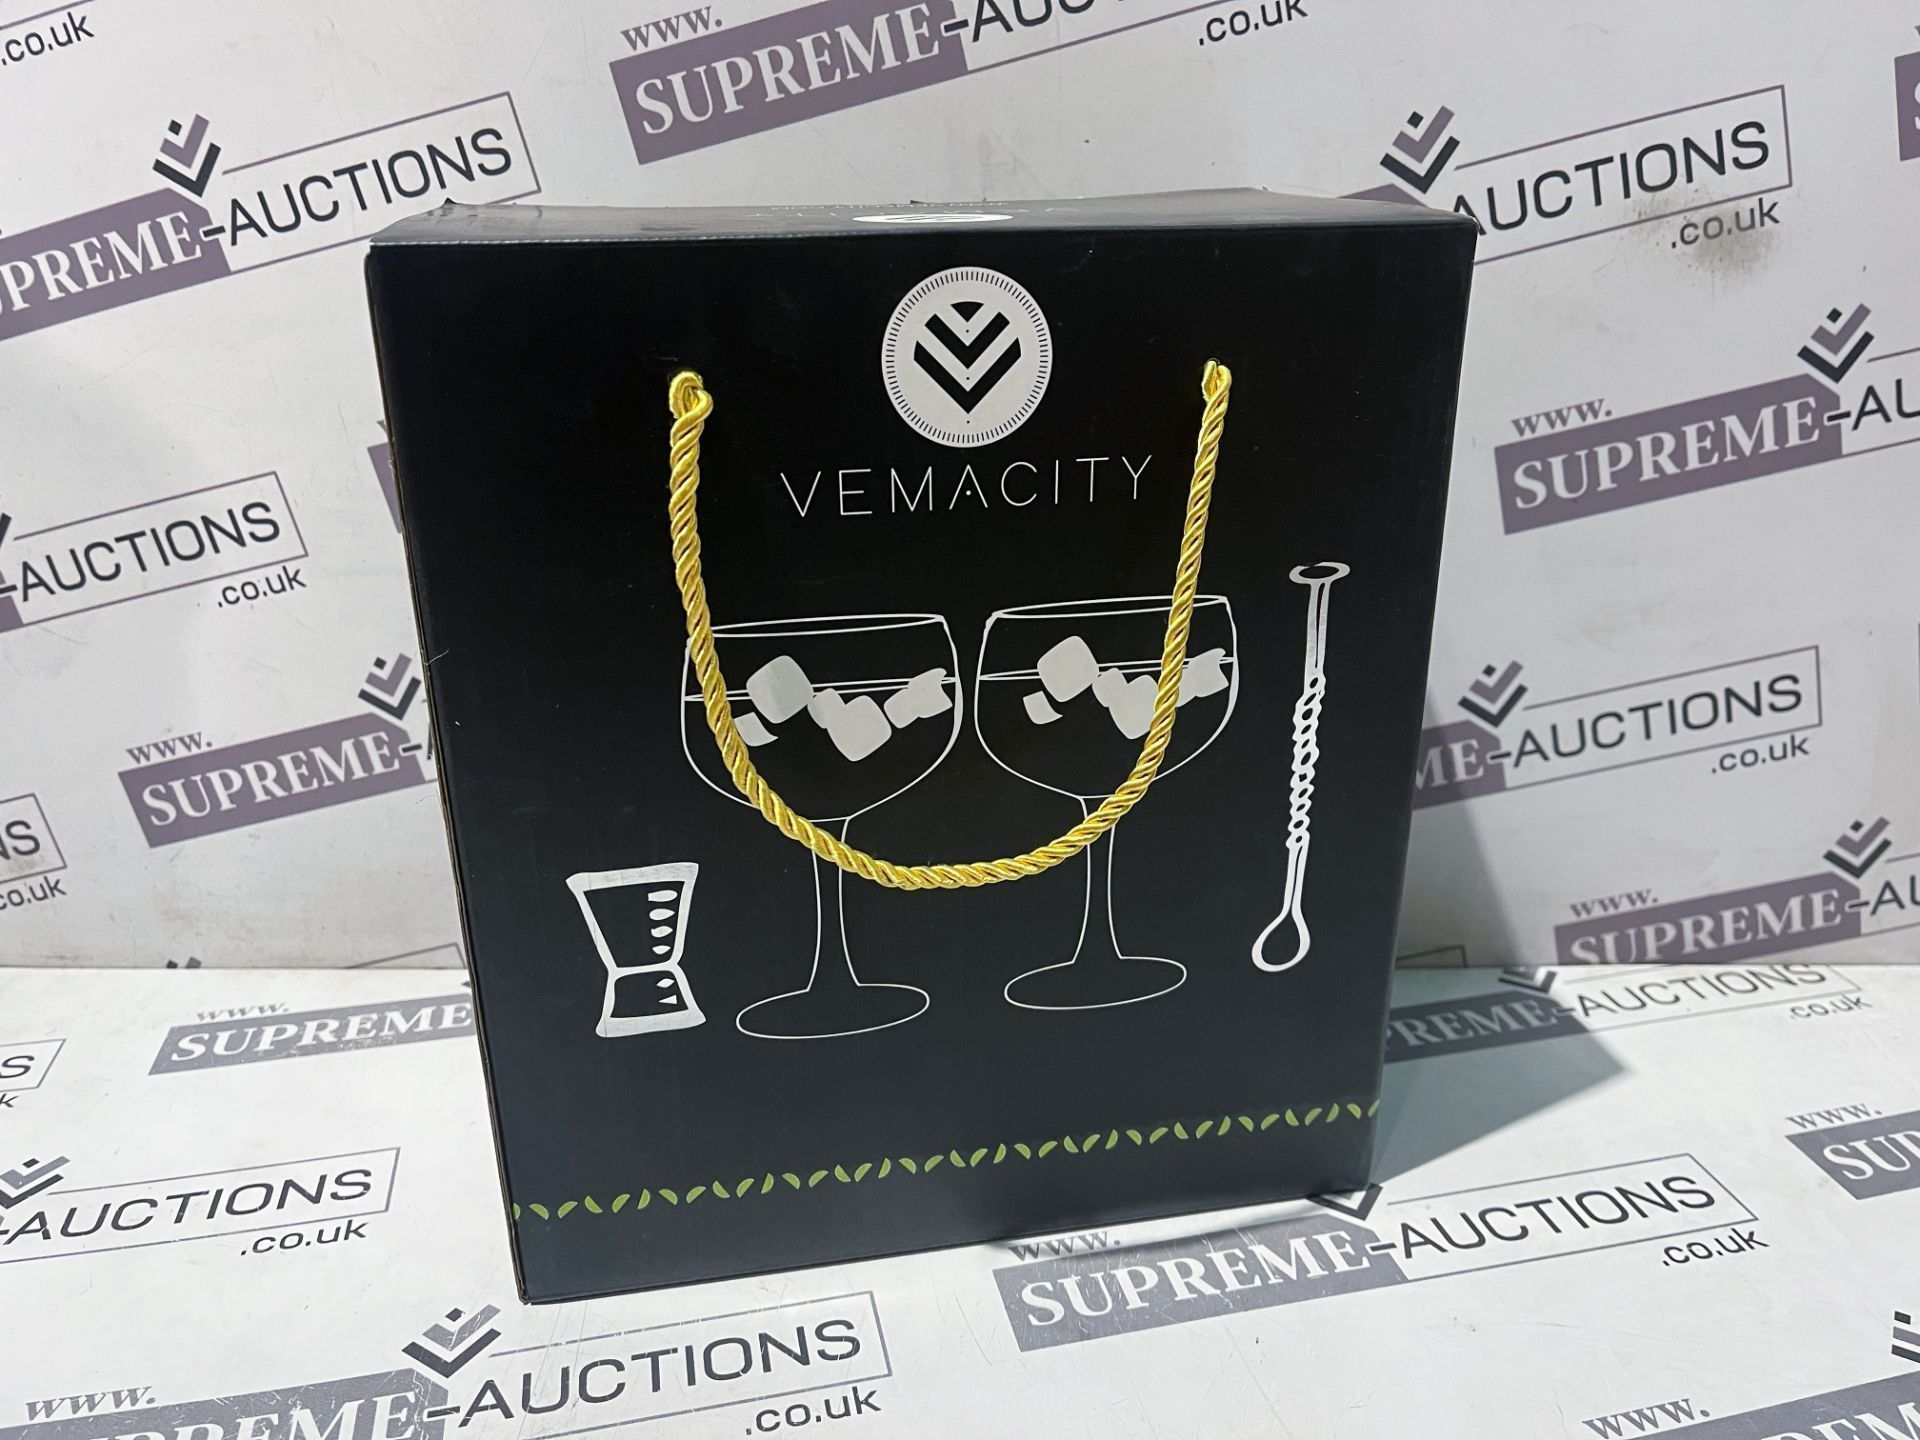 6 X BRAND NEW VEMACITY LUXURY GIN SETS INCLUDING 2 HANDMADE RIPPLED COPA GIN GLASSES, ROSE GOLD